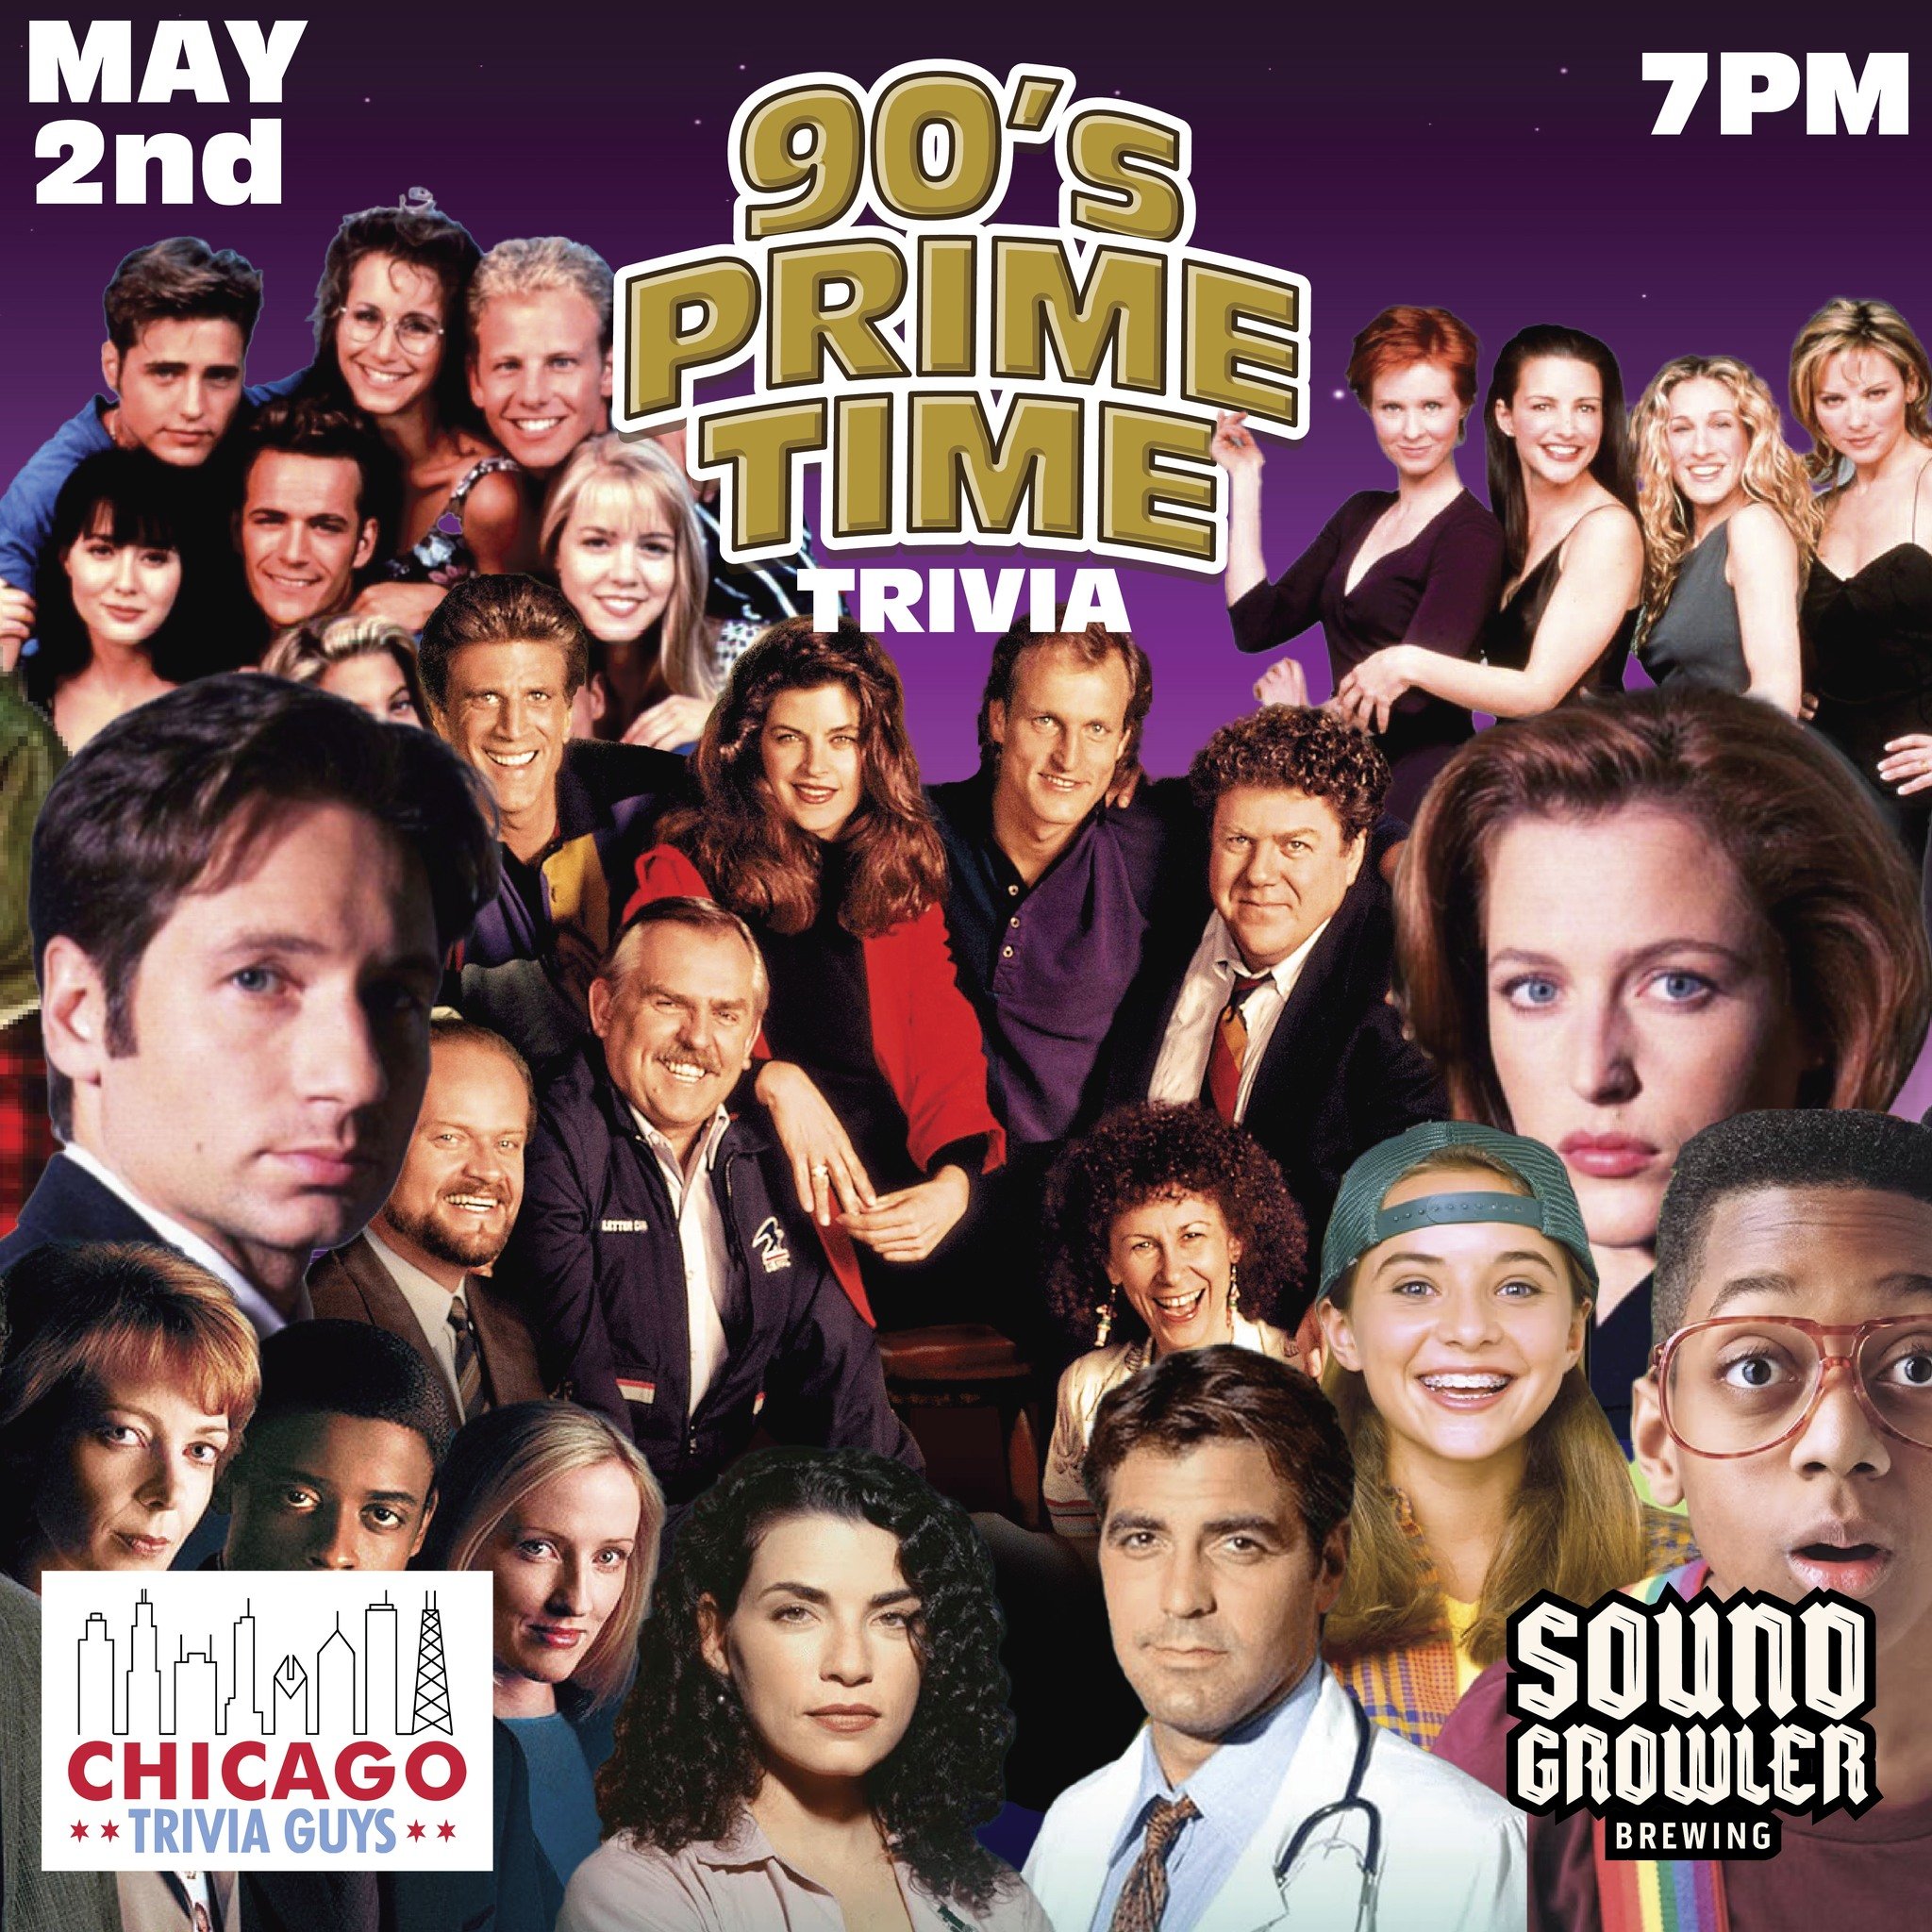 Calling all 90s TV aficionados! 📺 
Get ready to take a trip down memory lane with our 90s Primetime TV Trivia Night next Thursday, May 2nd at Soundgrowler Brewing! Join us at 7pm for a blast from the past as we quiz you on all your favorite shows fr